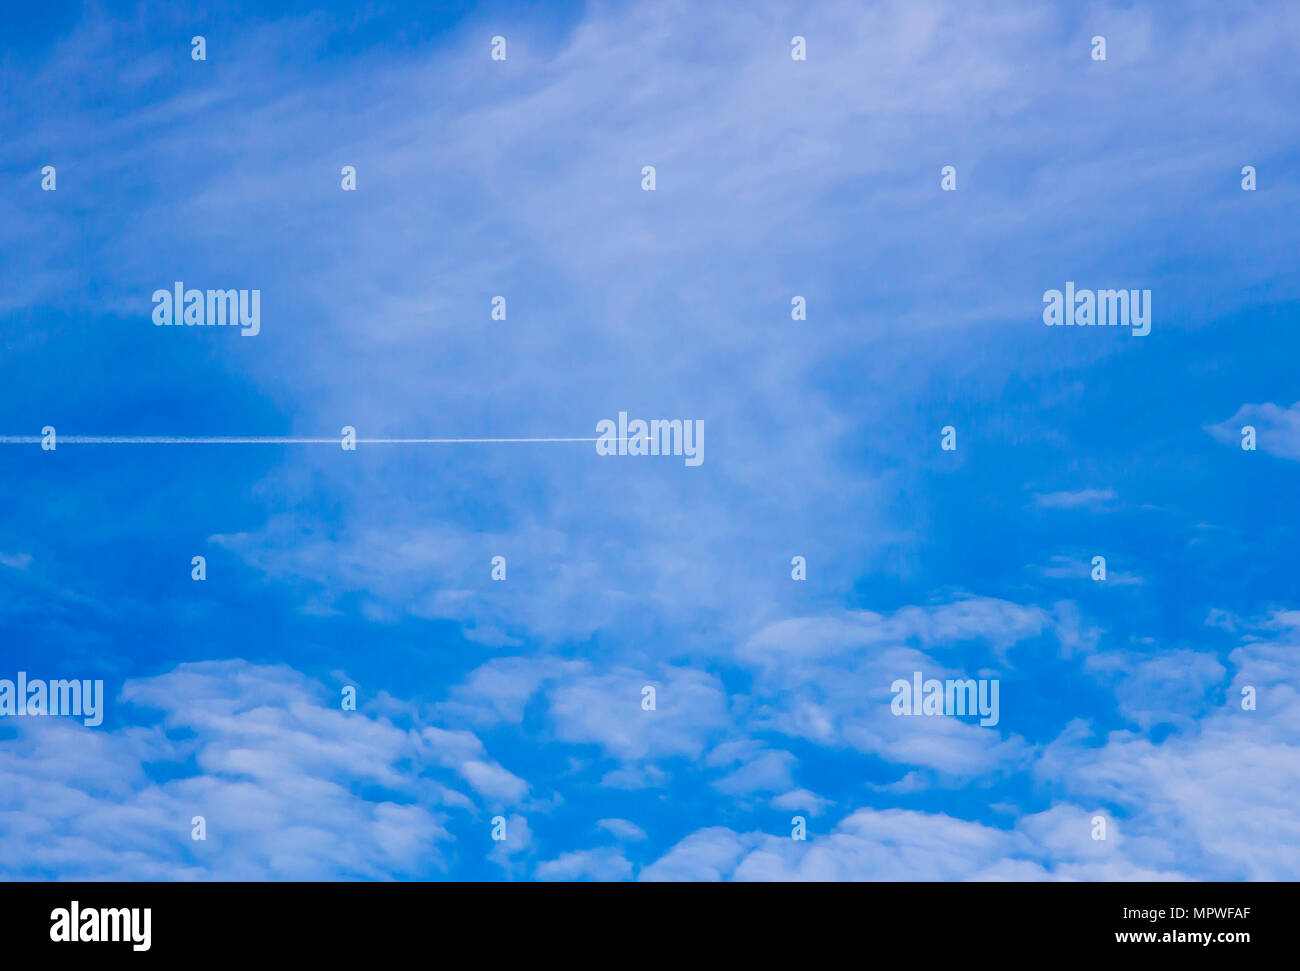 White Trace from airplane in blue sky with sparse clouds Stock Photo